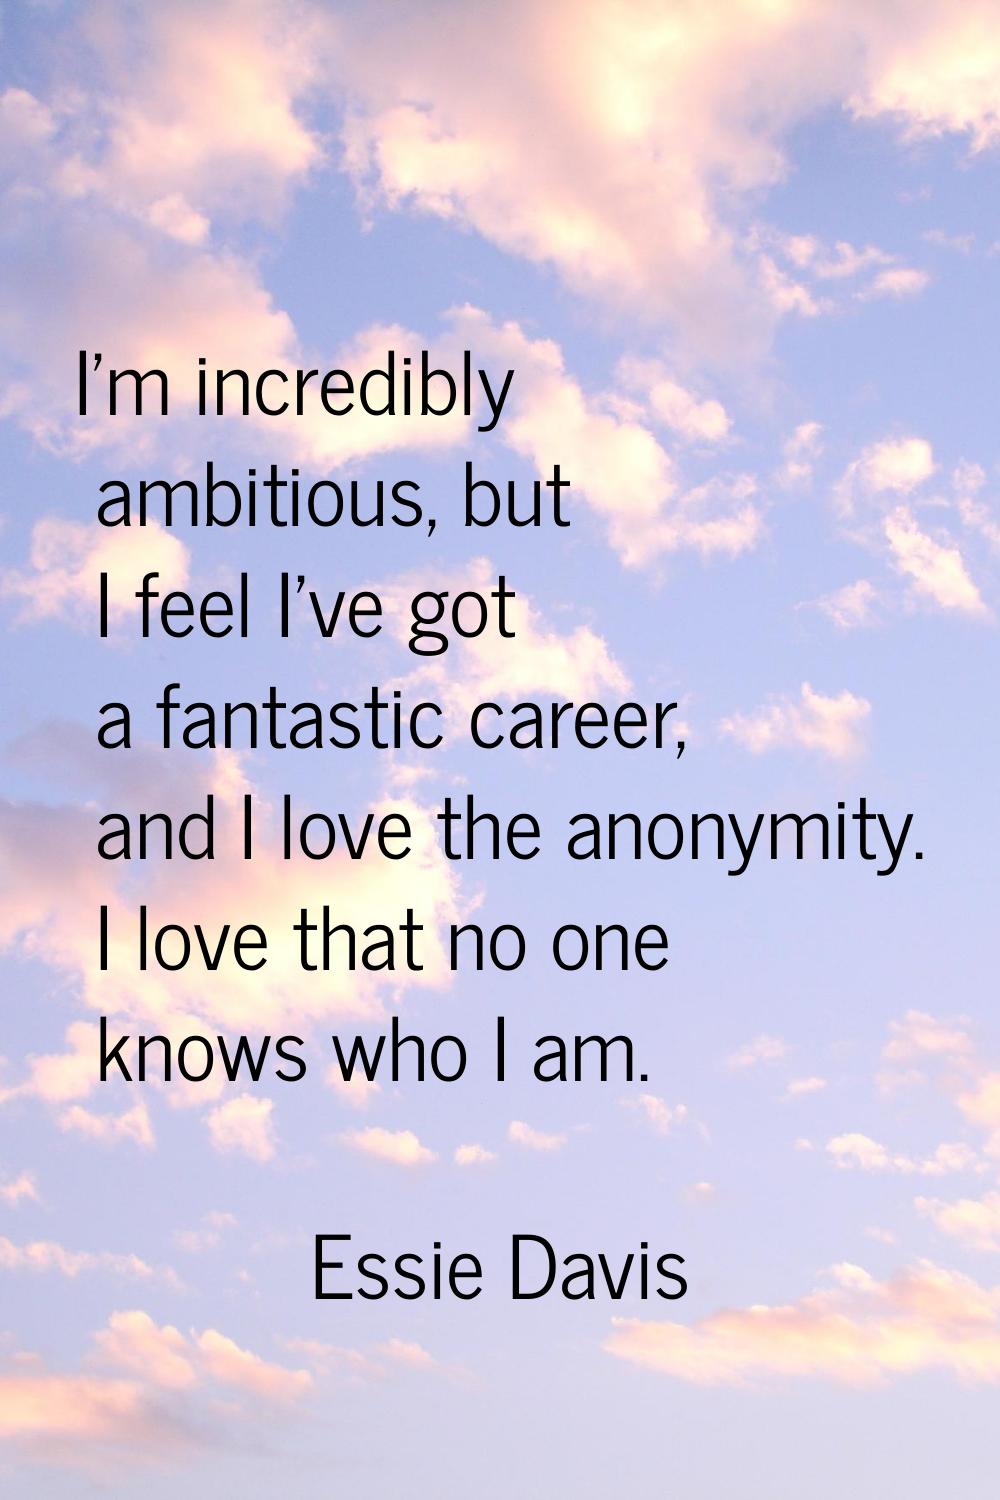 I'm incredibly ambitious, but I feel I've got a fantastic career, and I love the anonymity. I love 